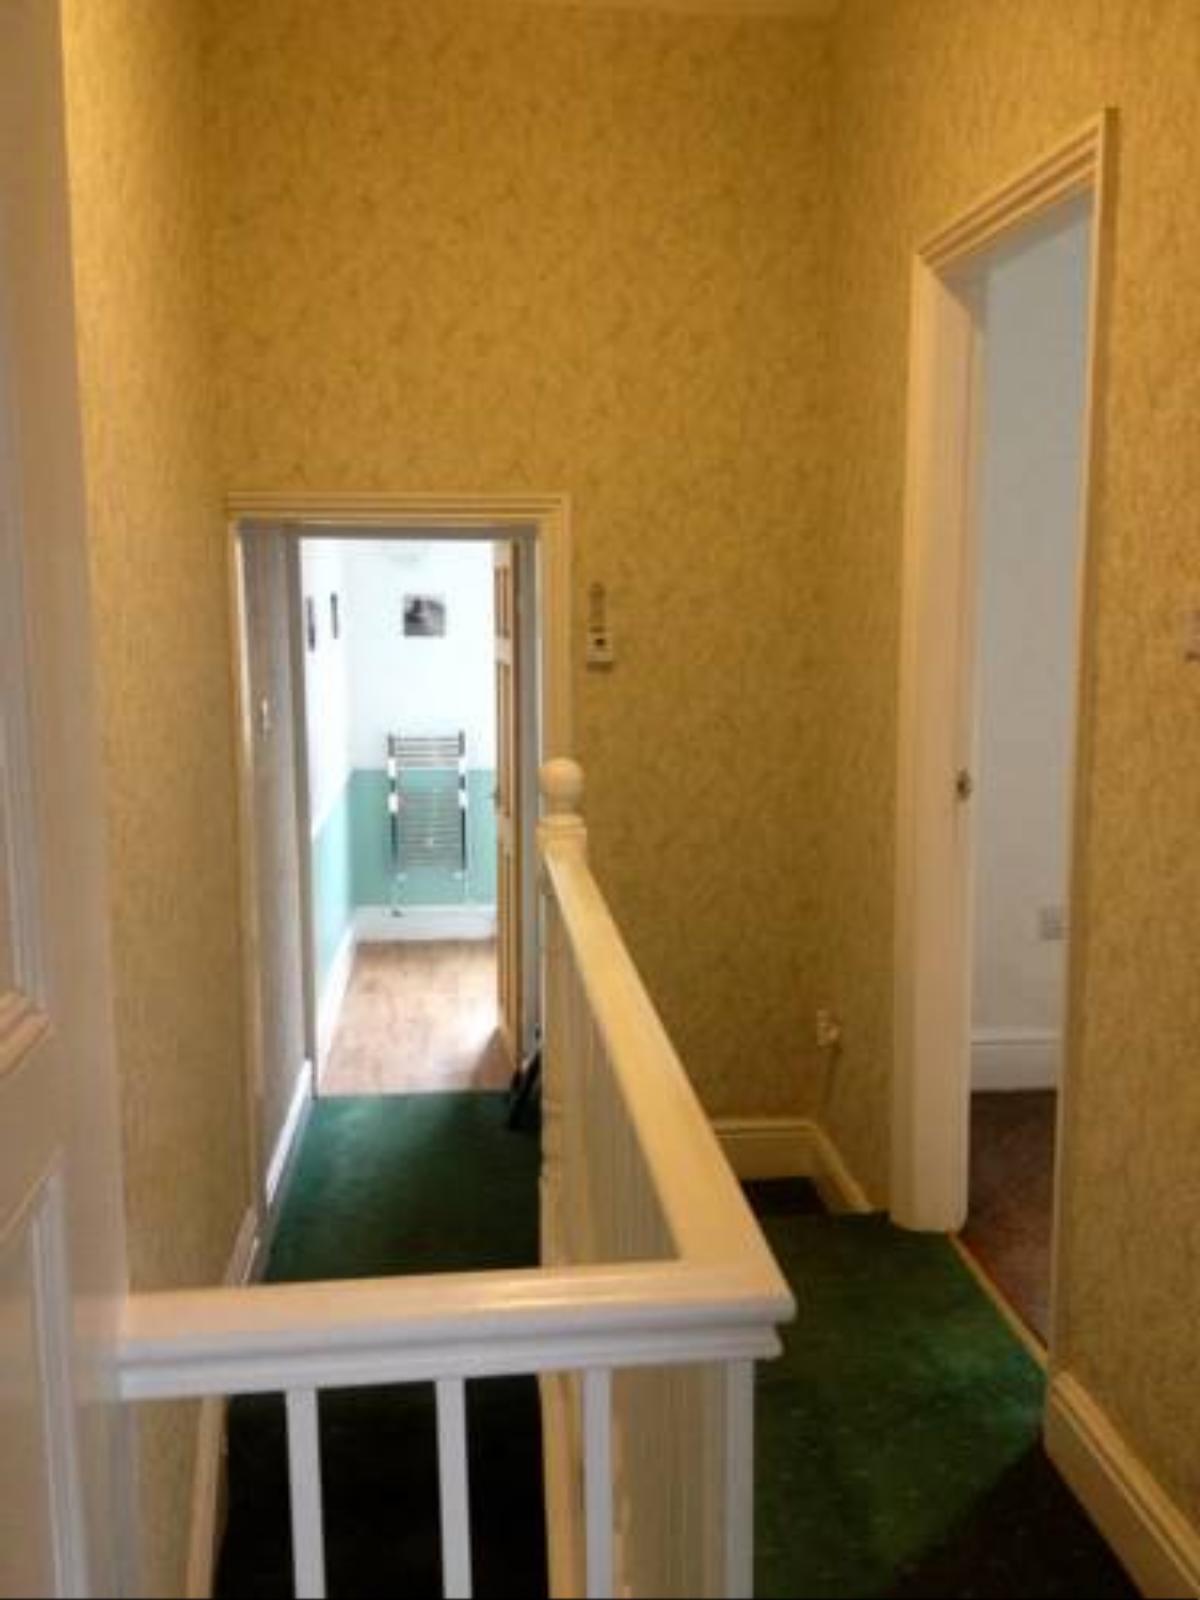 Little Oyster Guest House Hotel Barrow in Furness United Kingdom